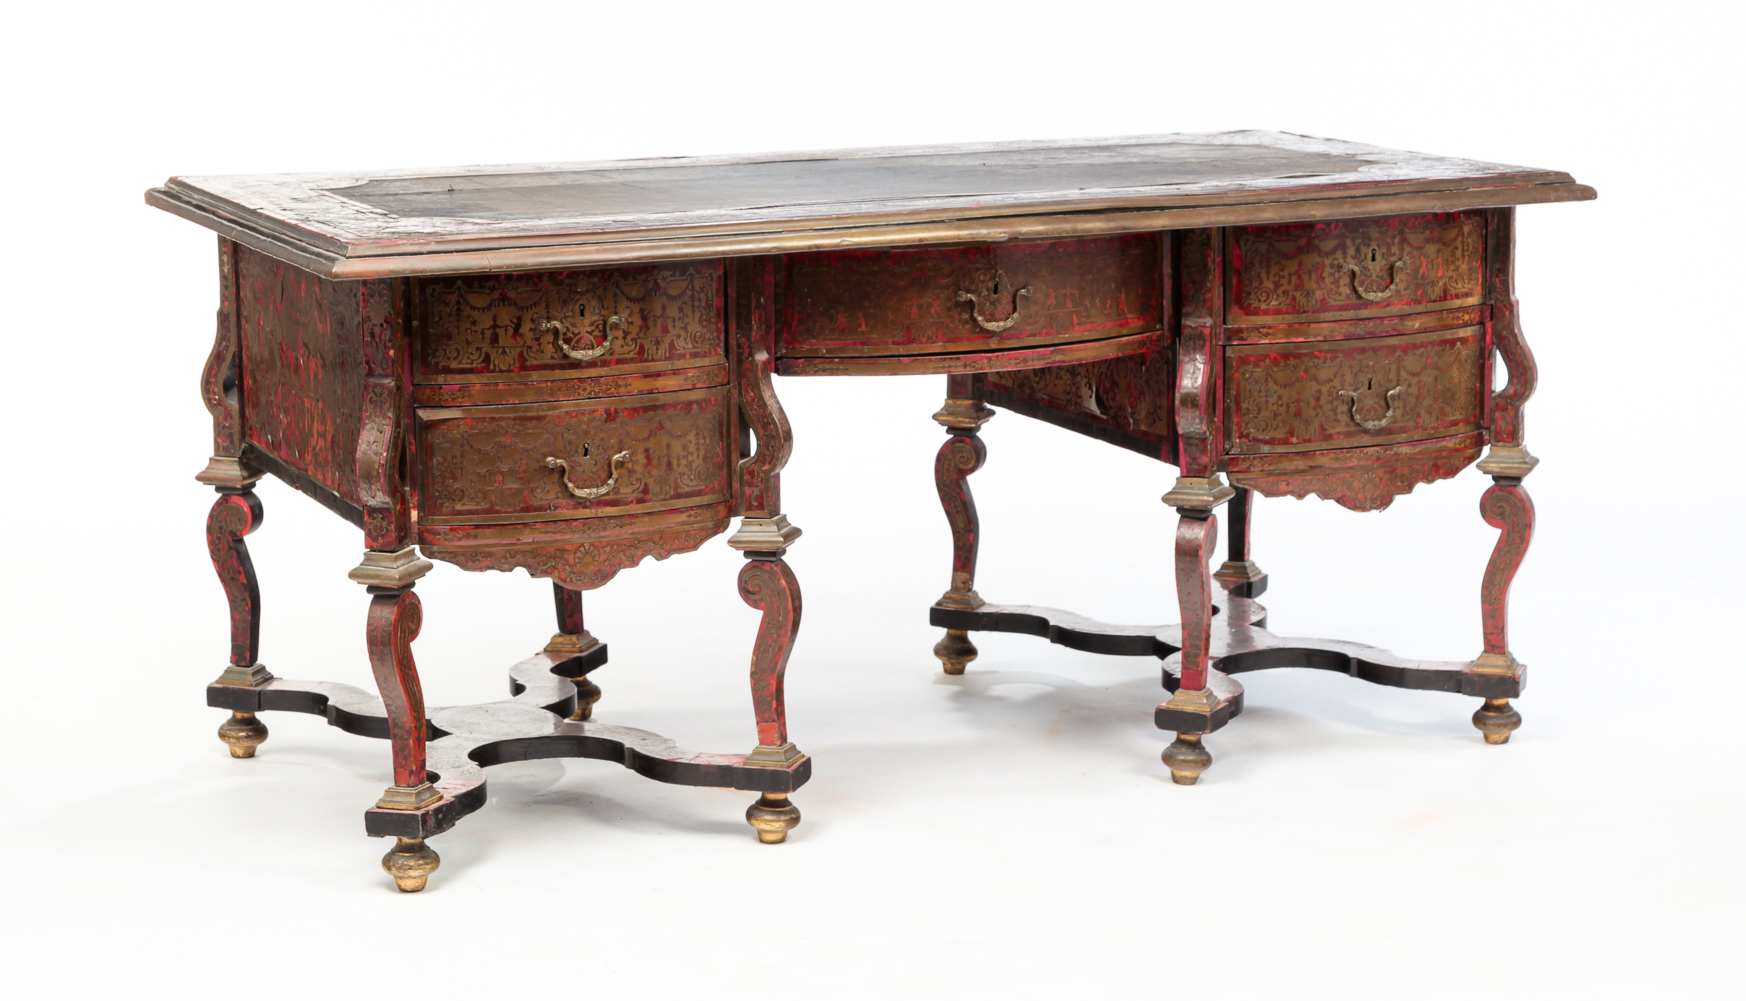 FRENCH BOULLE DESK. Eighteenth-19th